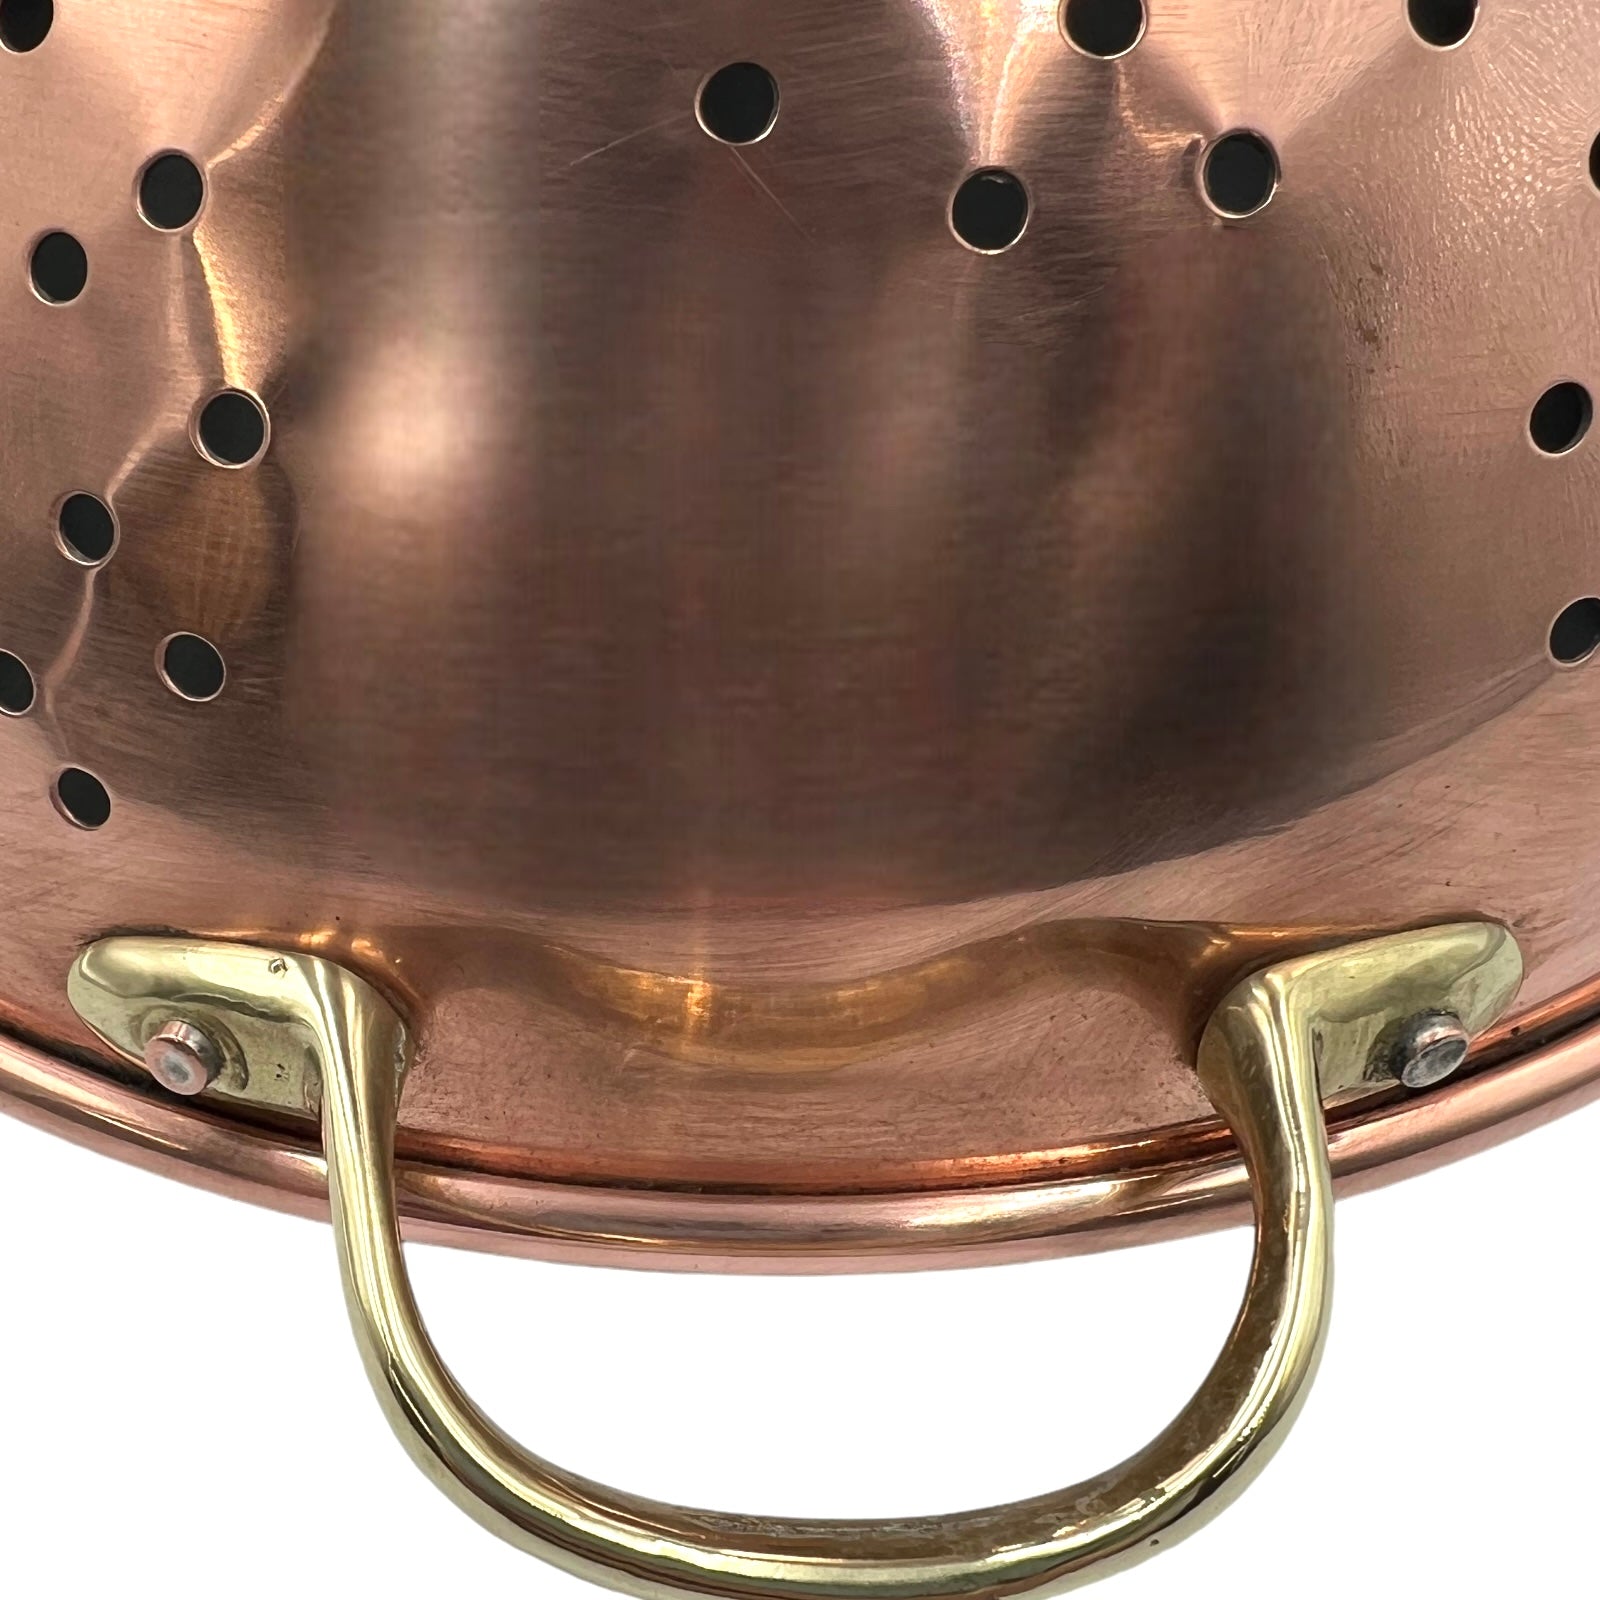 French shabby chic copper colander with tin lining 